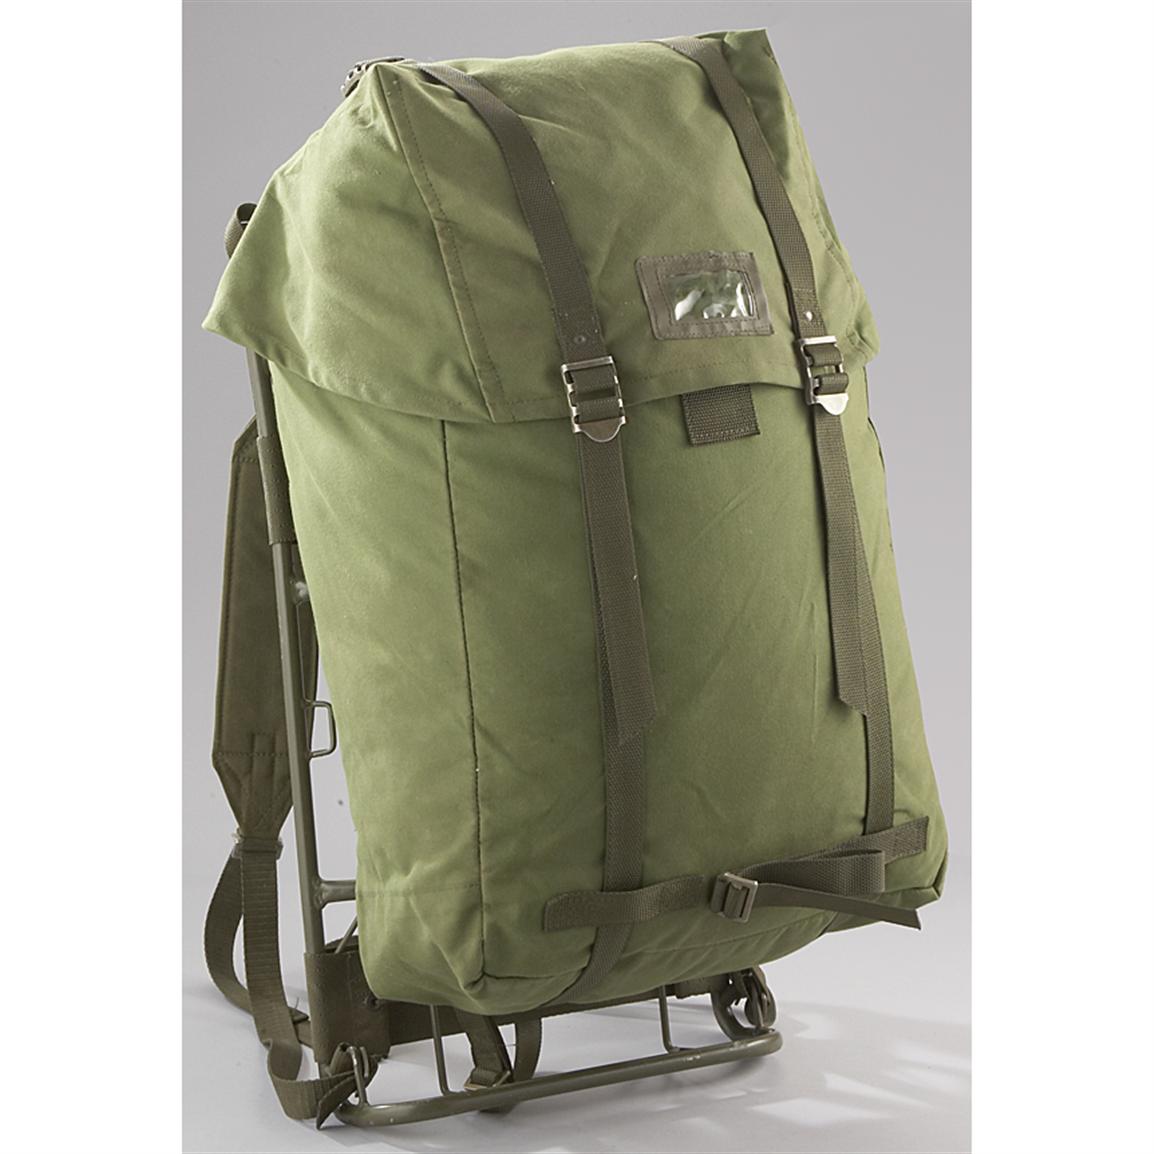 Military Surplus Backpack For Sale | IUCN Water